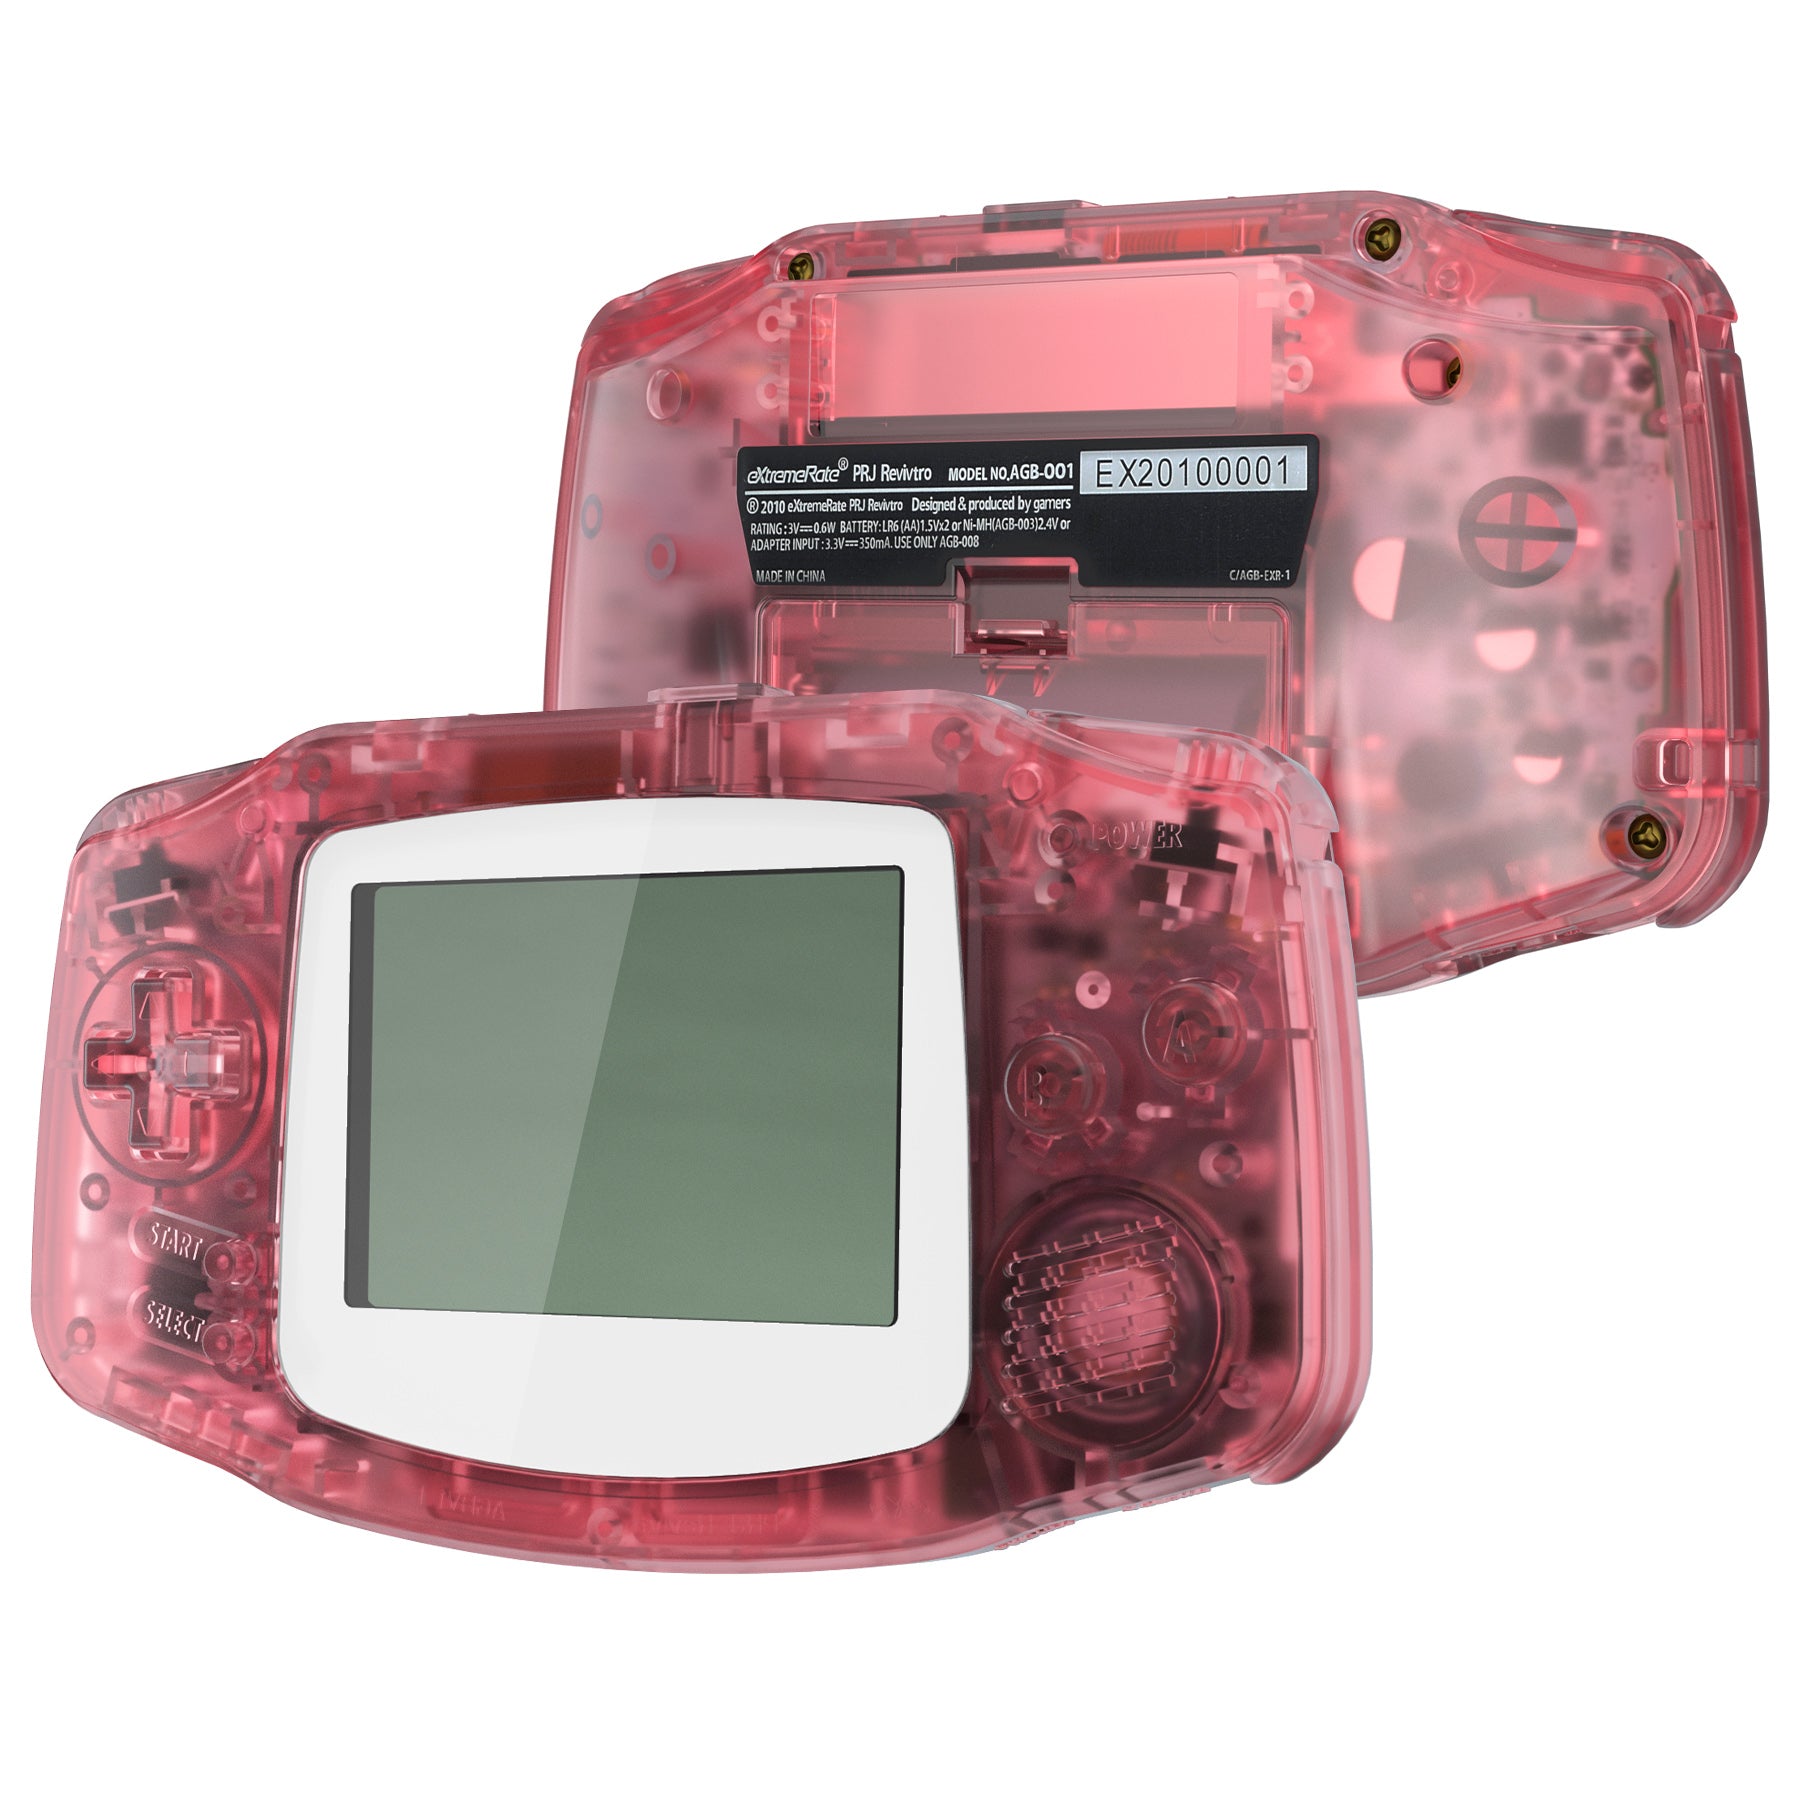 Transparent pink GBA and black GBAIwouldbehappyto